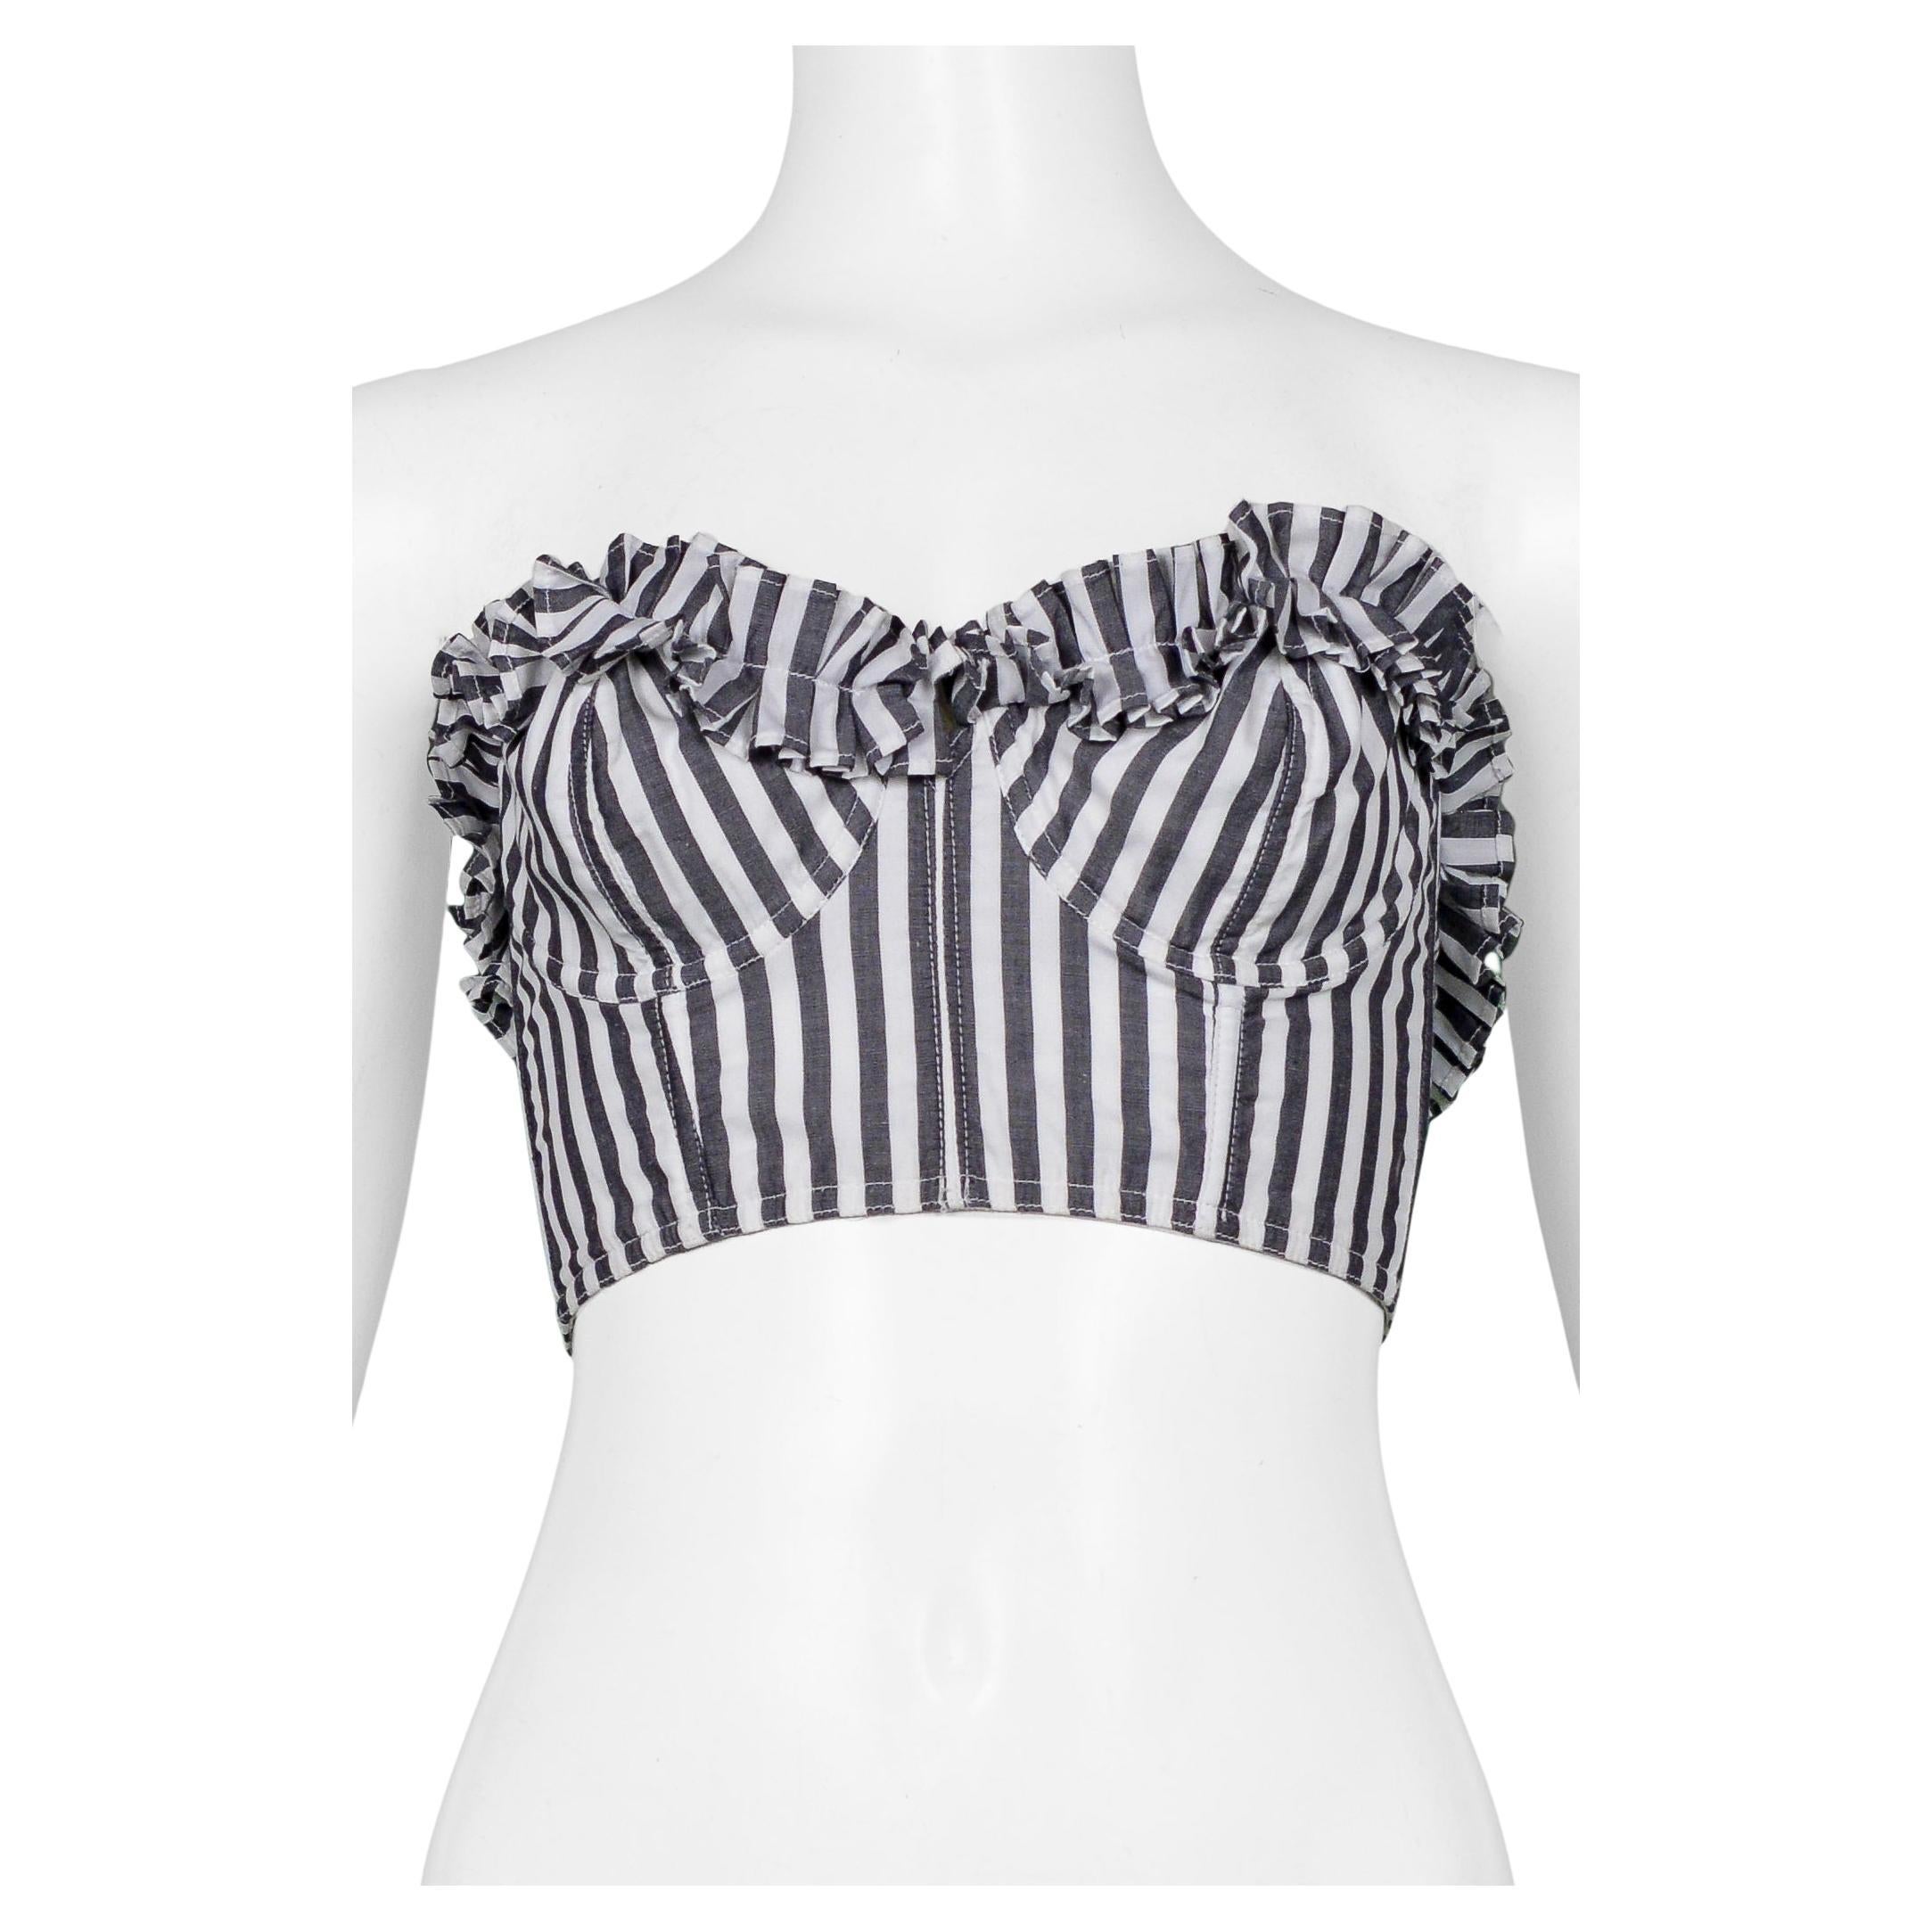 Chantal Thomass Black & White Striped Bustier Top With Ruffles For Sale